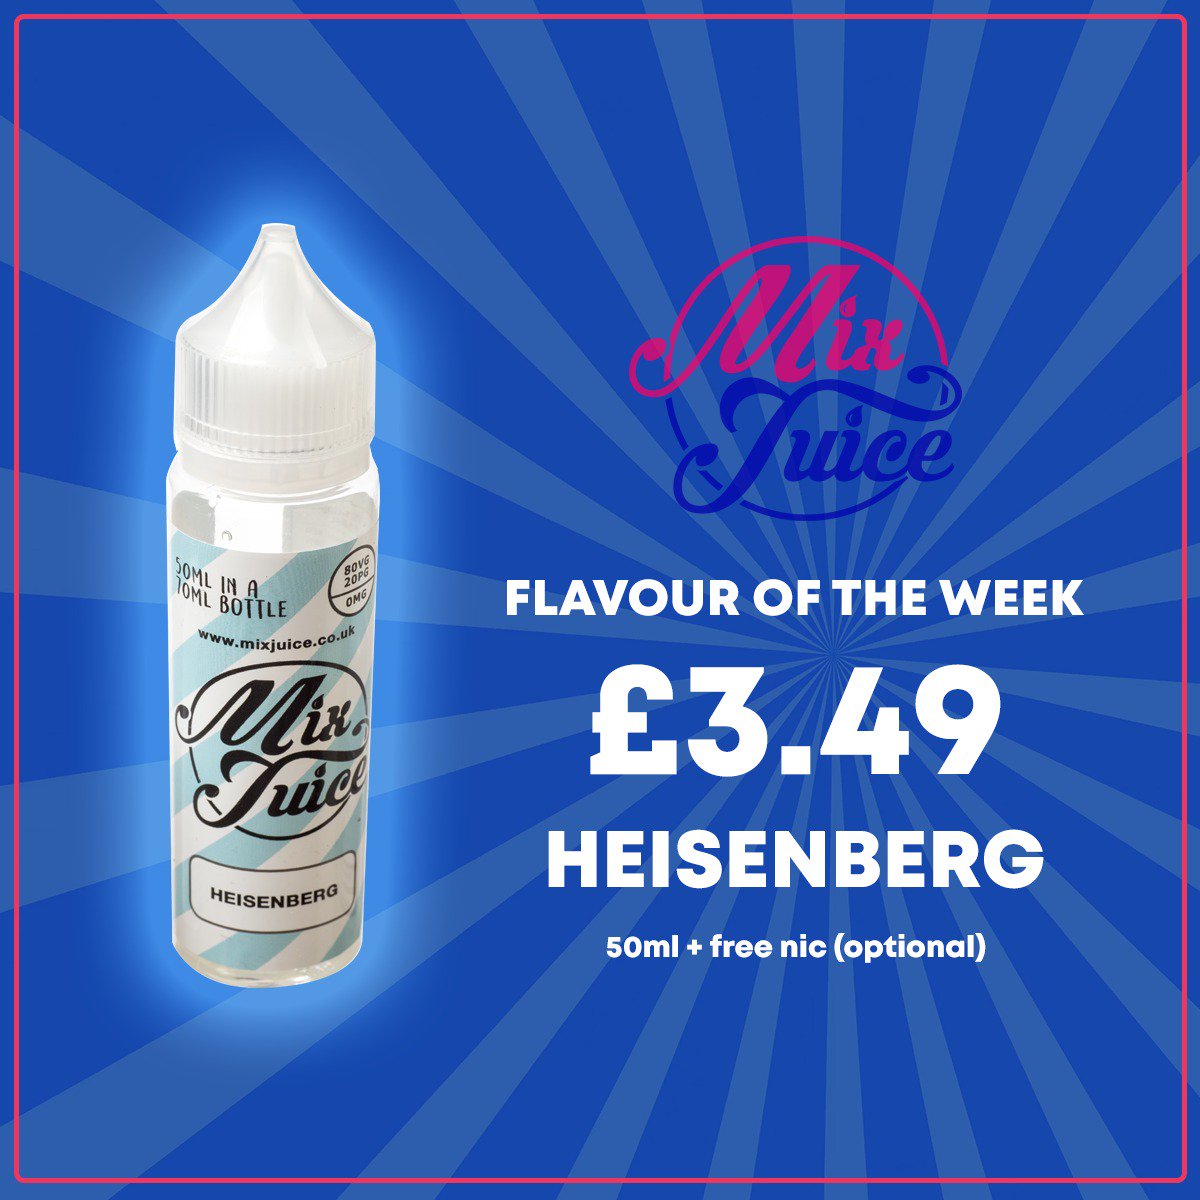 Flavour of the Week - Heisenberg!  Only £3.49 for 50ml & nic!   Add to cart and the discount will be auto applied.

GET - mixjuice.co.uk/product/mix-ju…

#vaping #vapers #vapeuk #ukvaping #cloudtricks #eliquiddeals #vapedeals #vapejuice